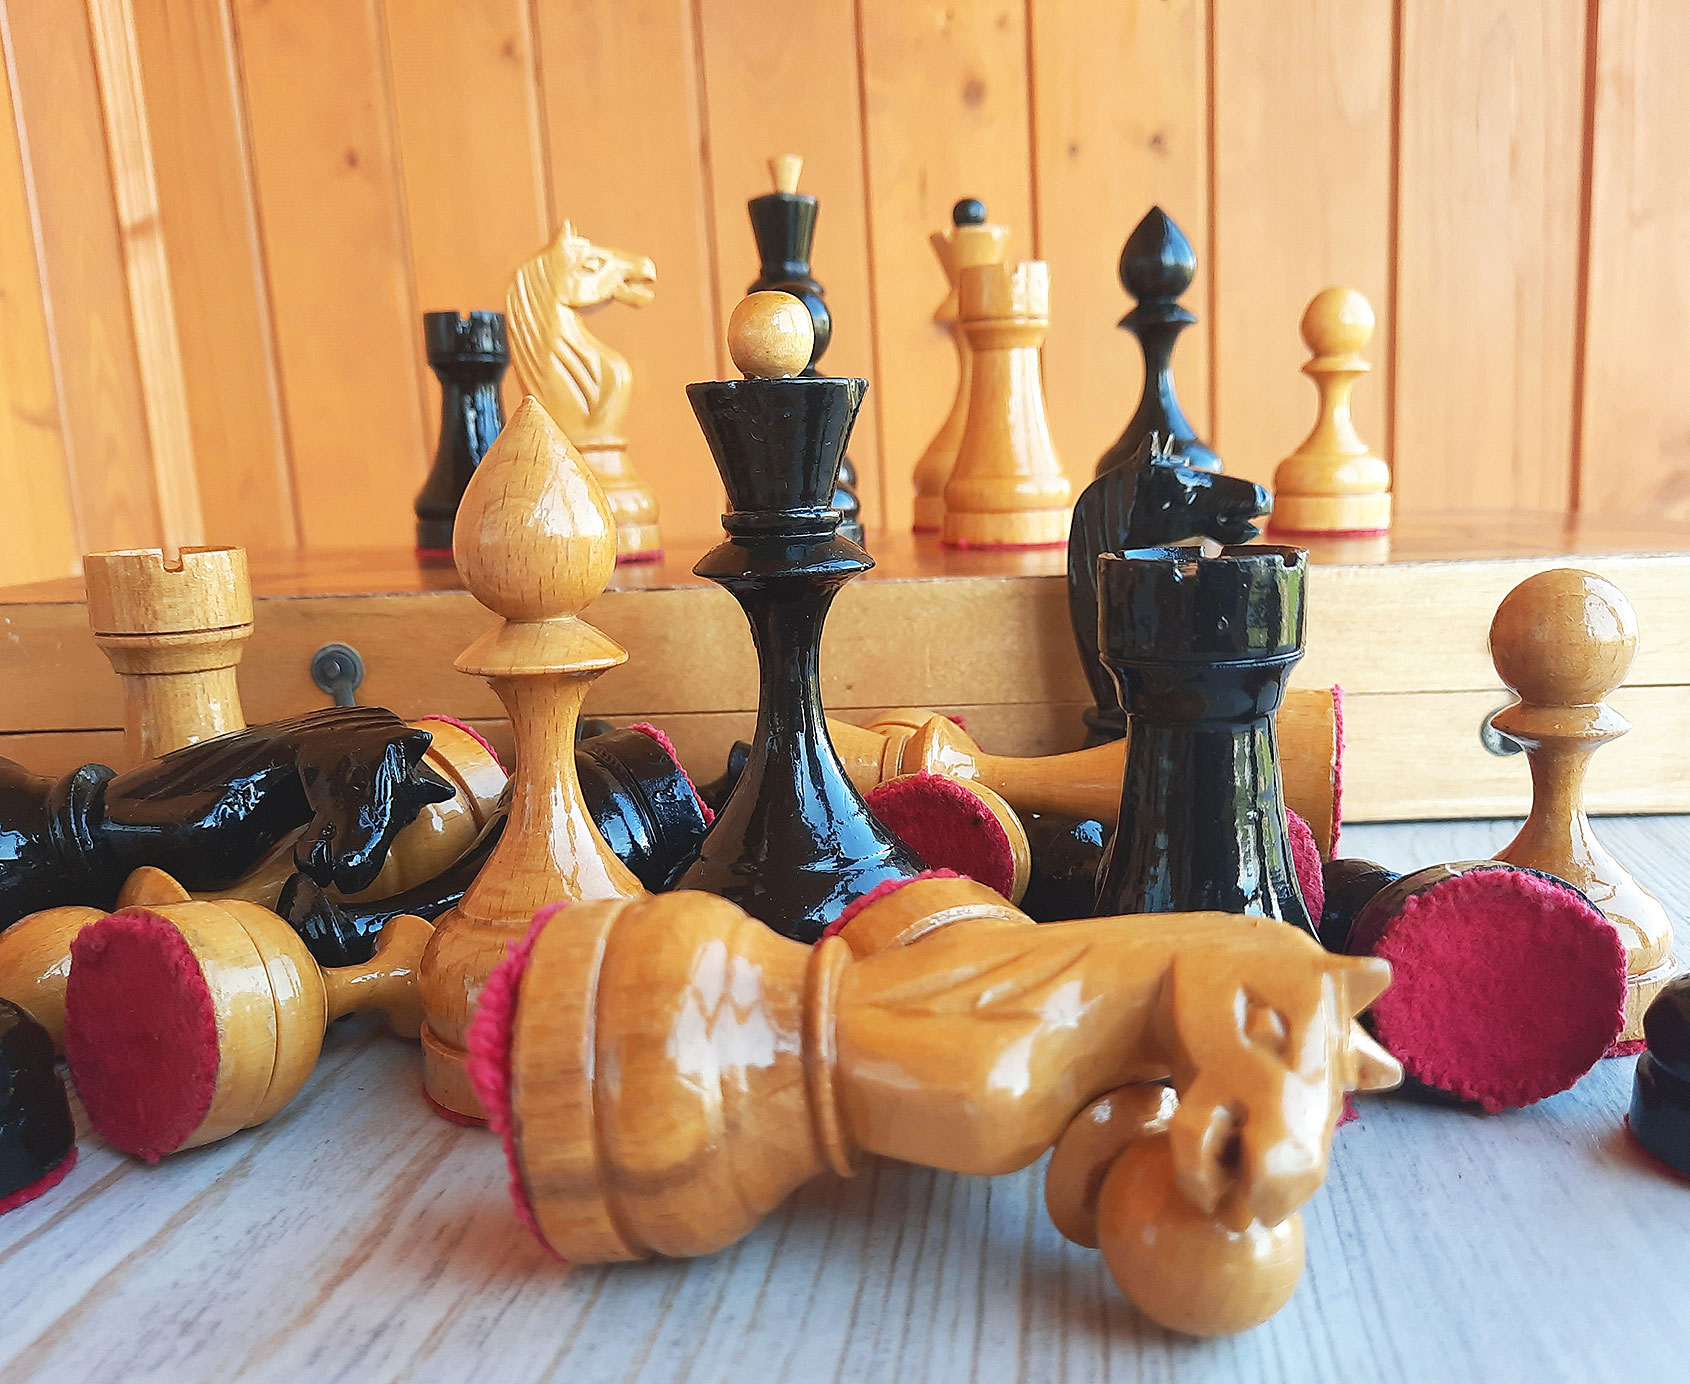 1950s old chess set USSR wooden vintage chess board 29x29cm - Shop Chess24  Board Games & Toys - Pinkoi